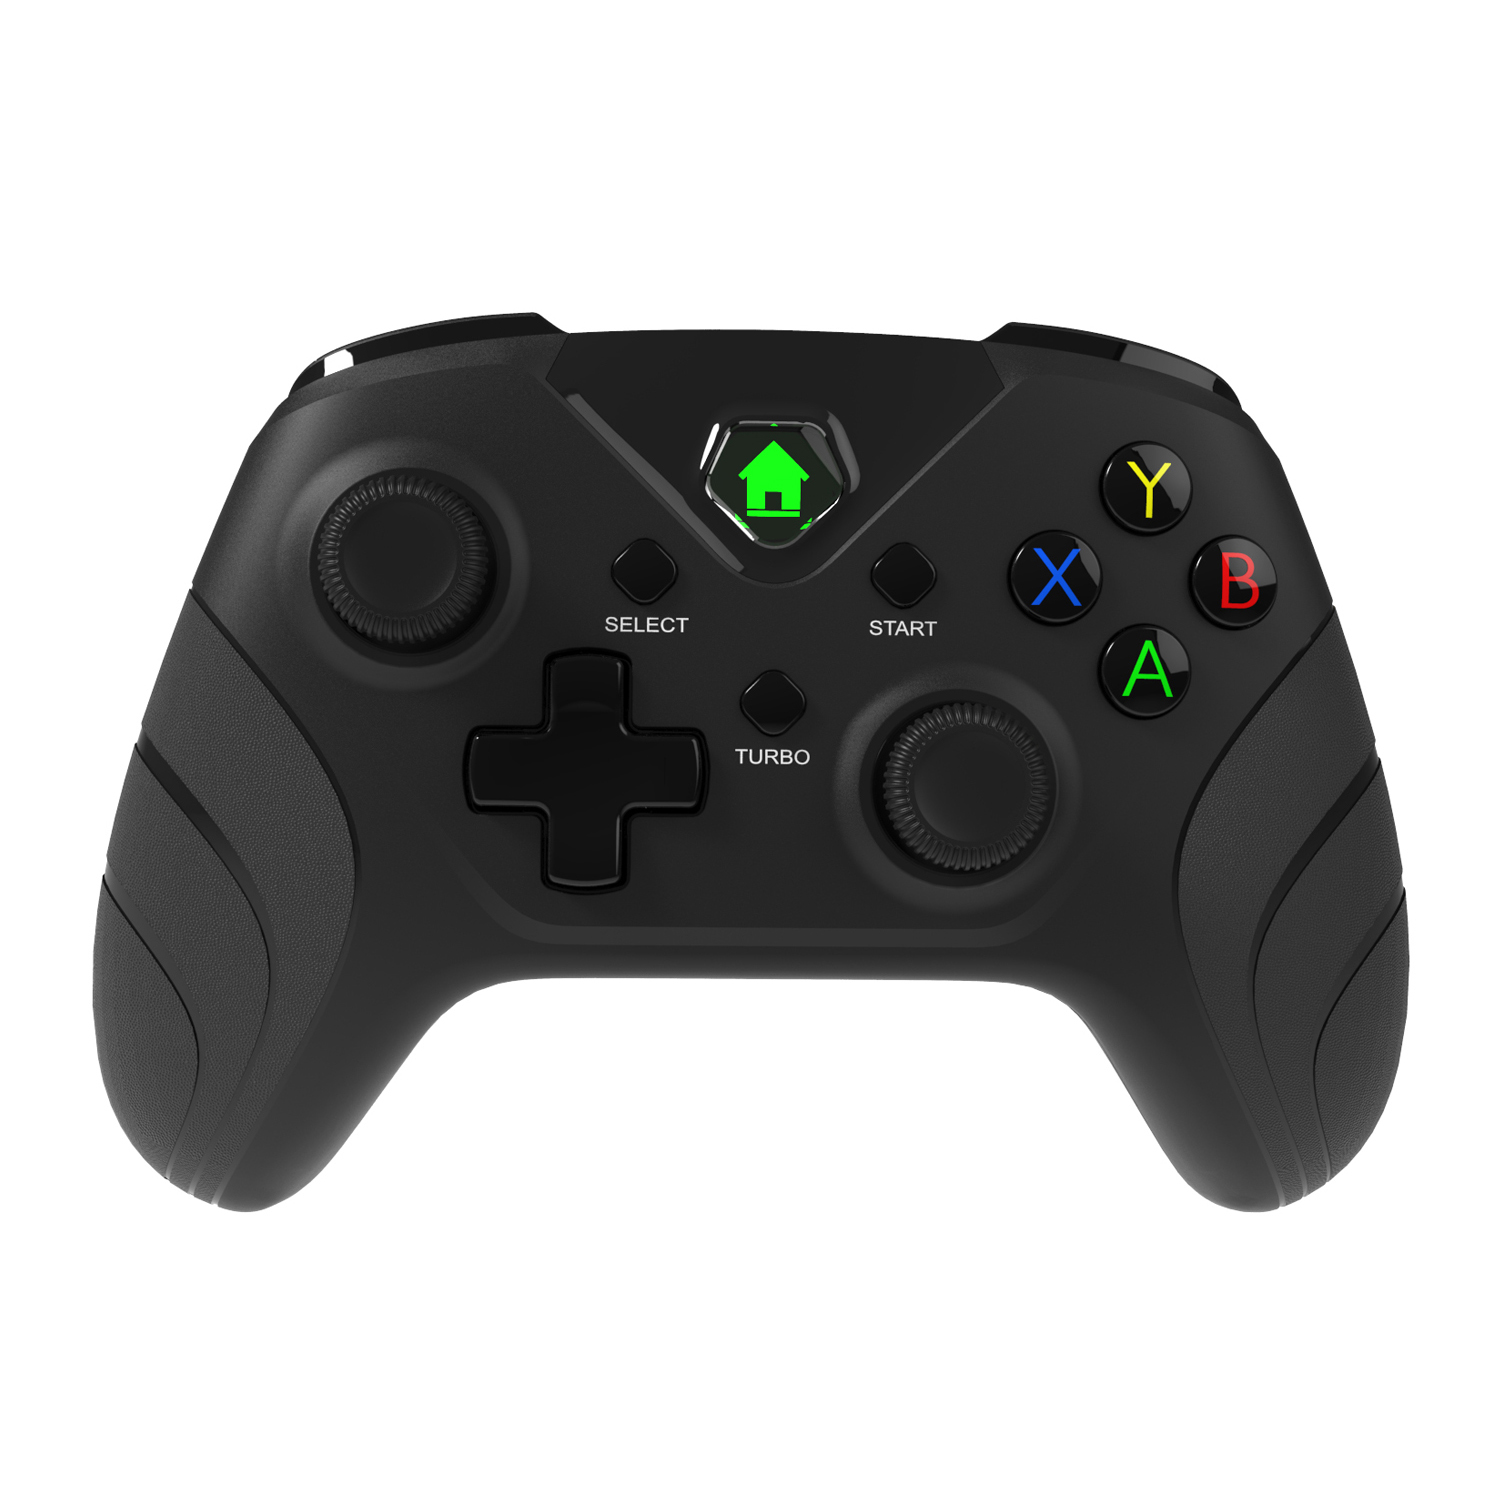 HYCARUS 2.4G Wireless Controller for Xbox Series X/ S, Xbox One